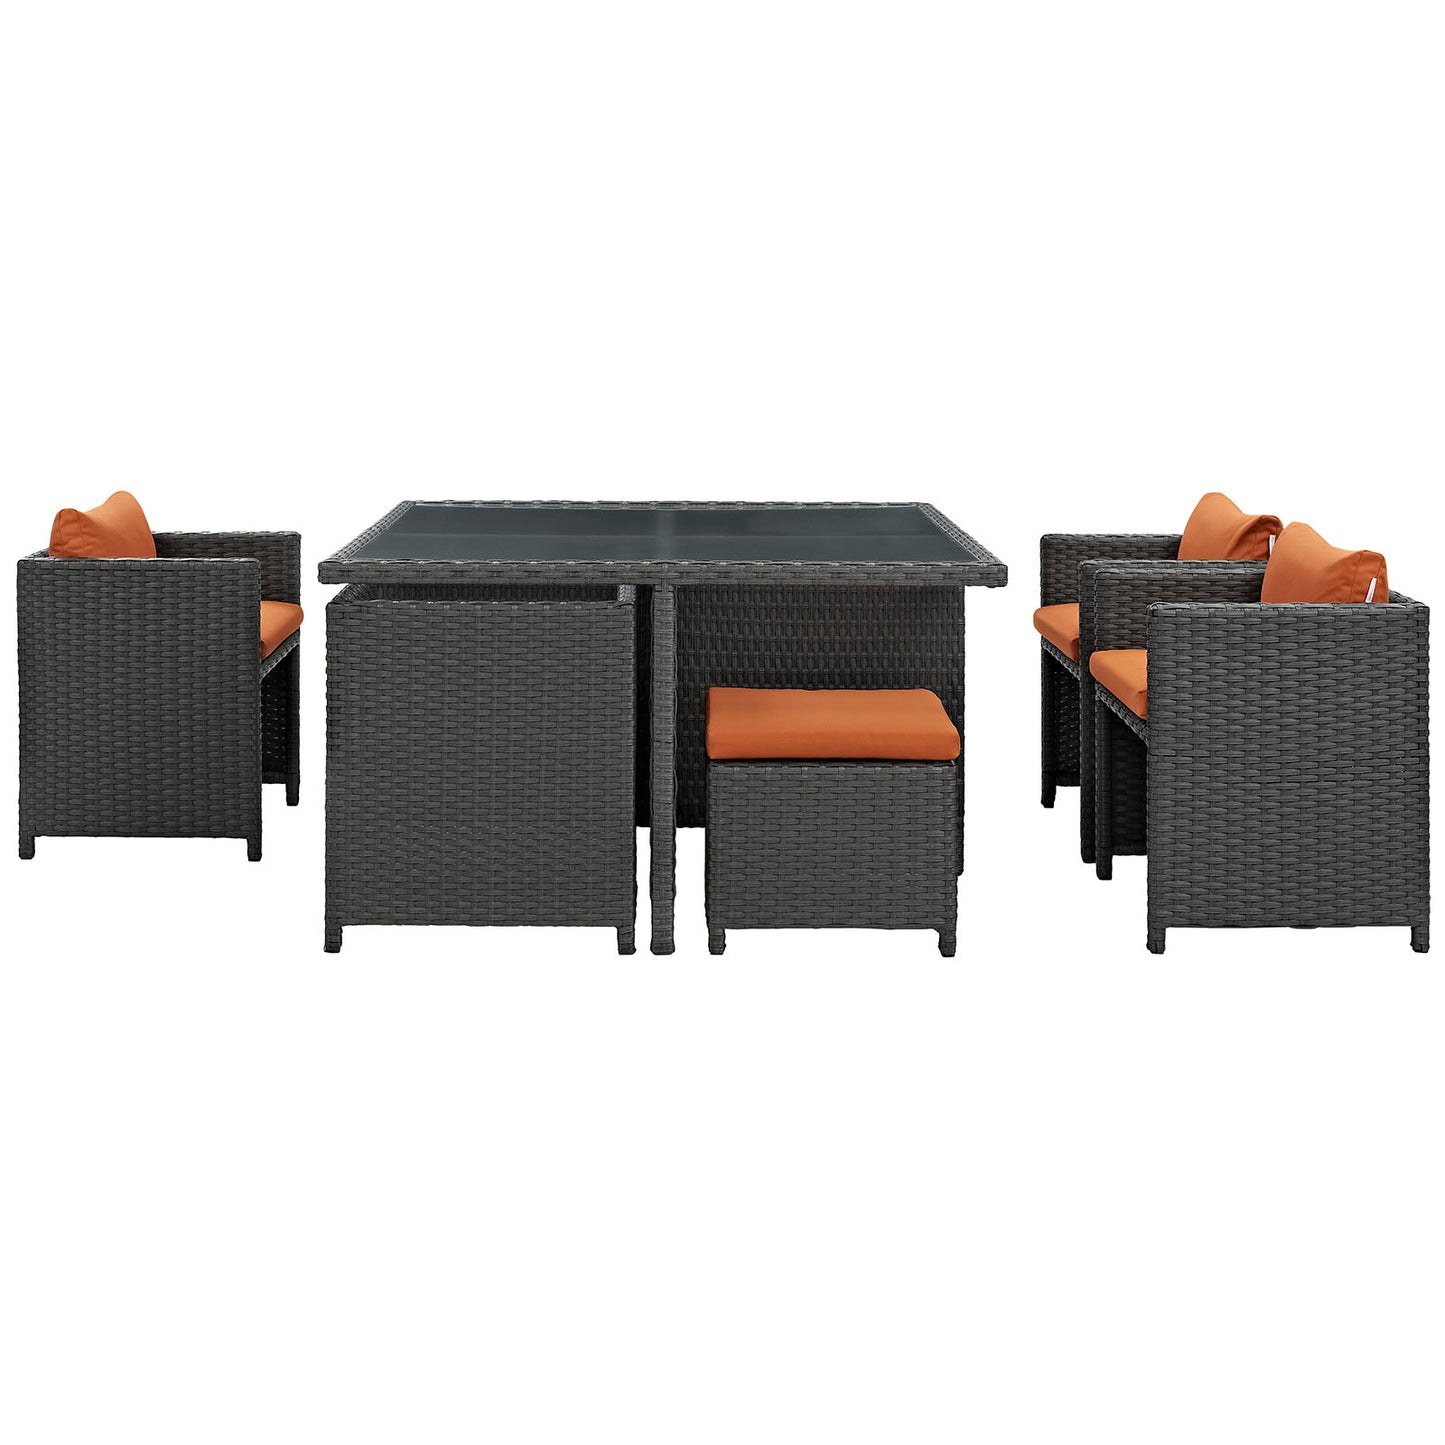 Modway Sojourn 9 Piece Outdoor Patio Glass Top Dining Set - EEI-1946